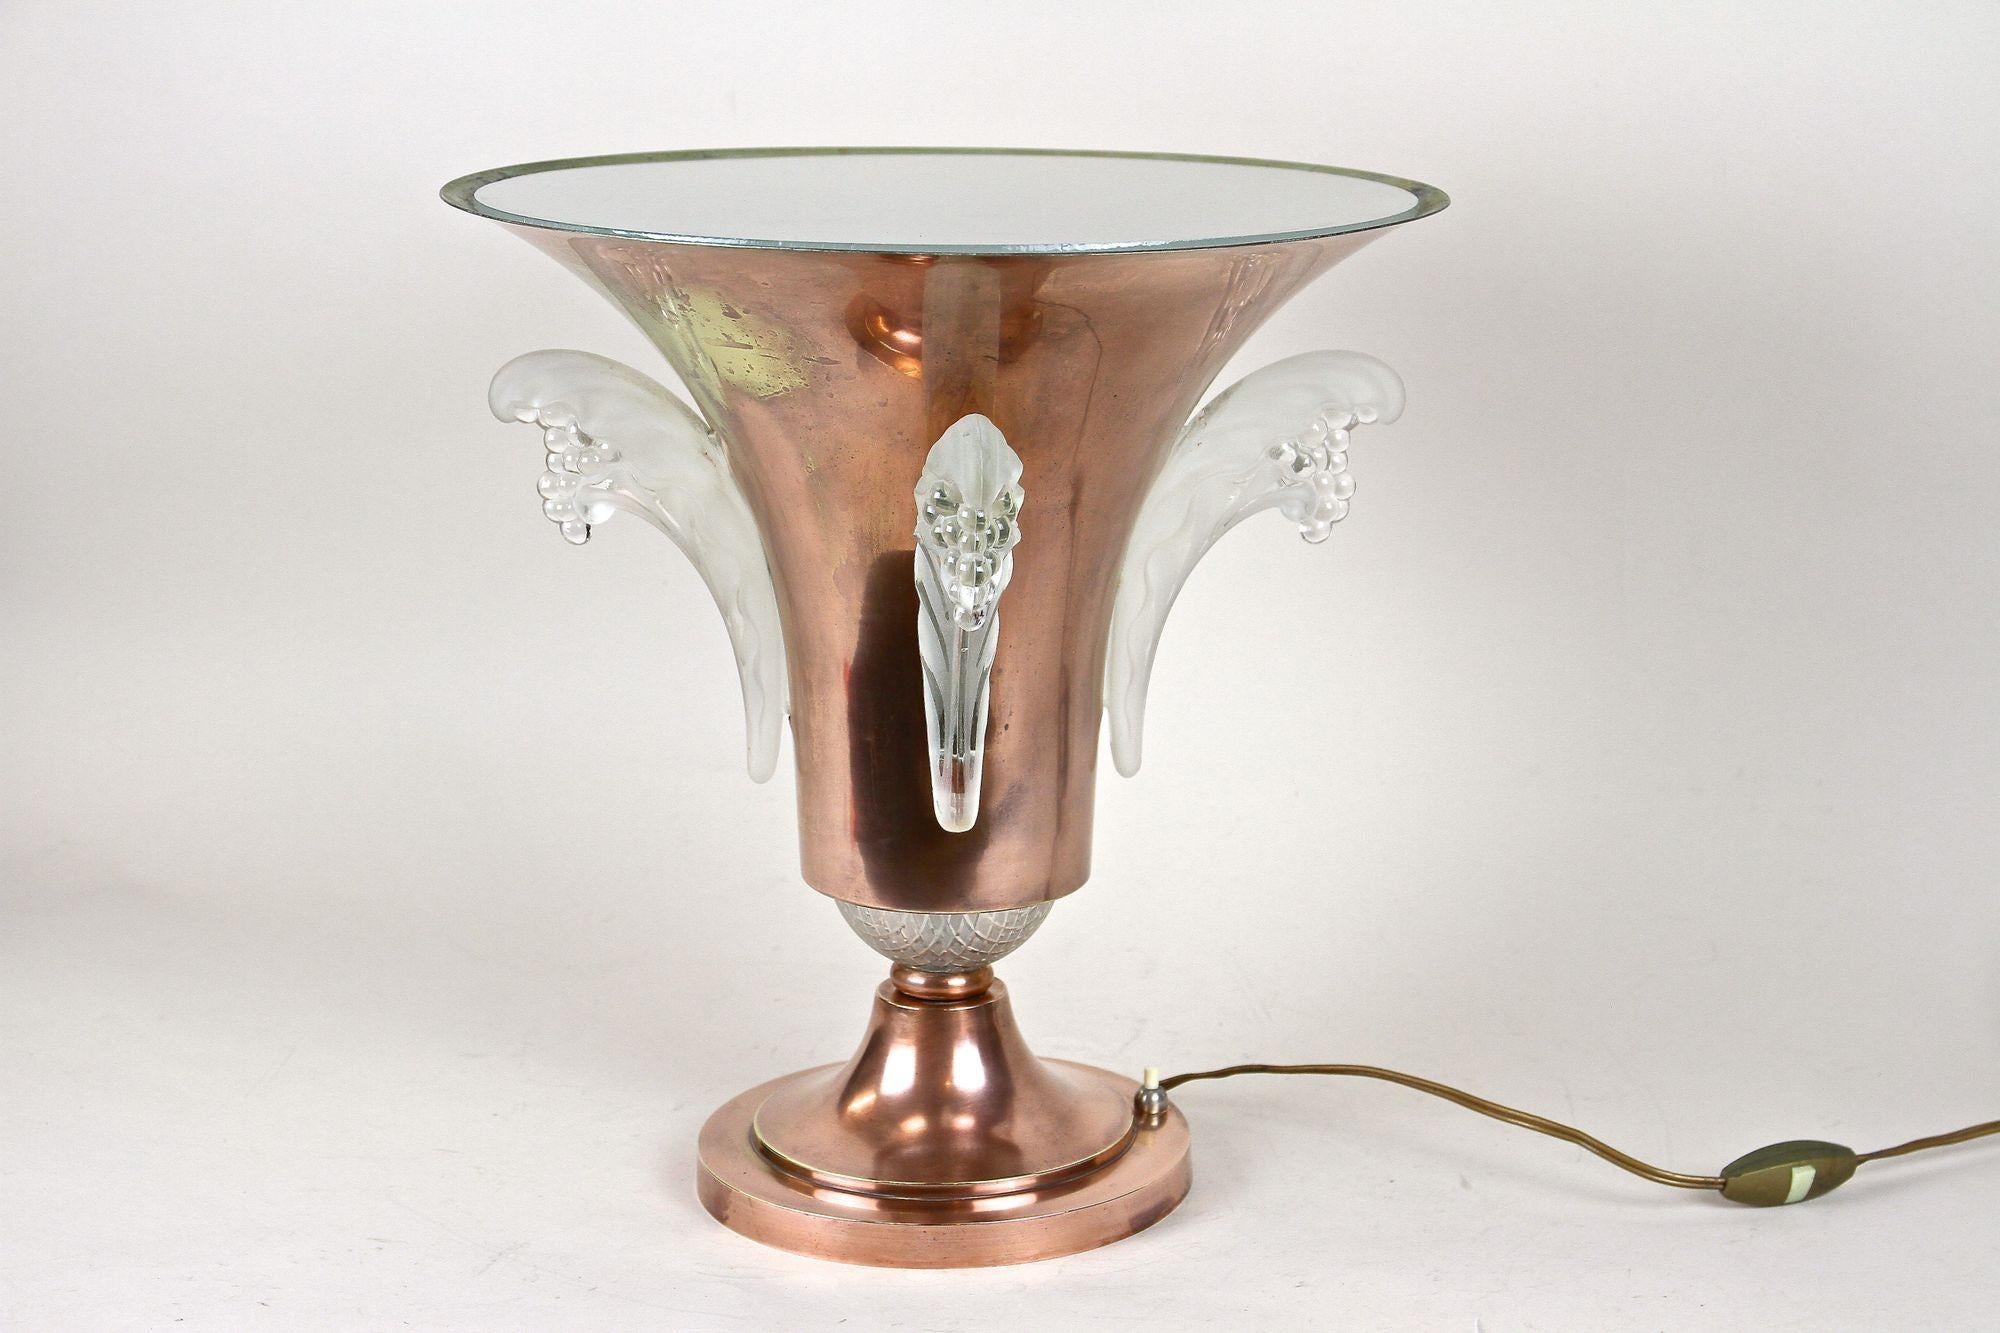 20th Century Art Deco Copper Table Lamp with Lalique Glass Elements, France, circa 1925 For Sale